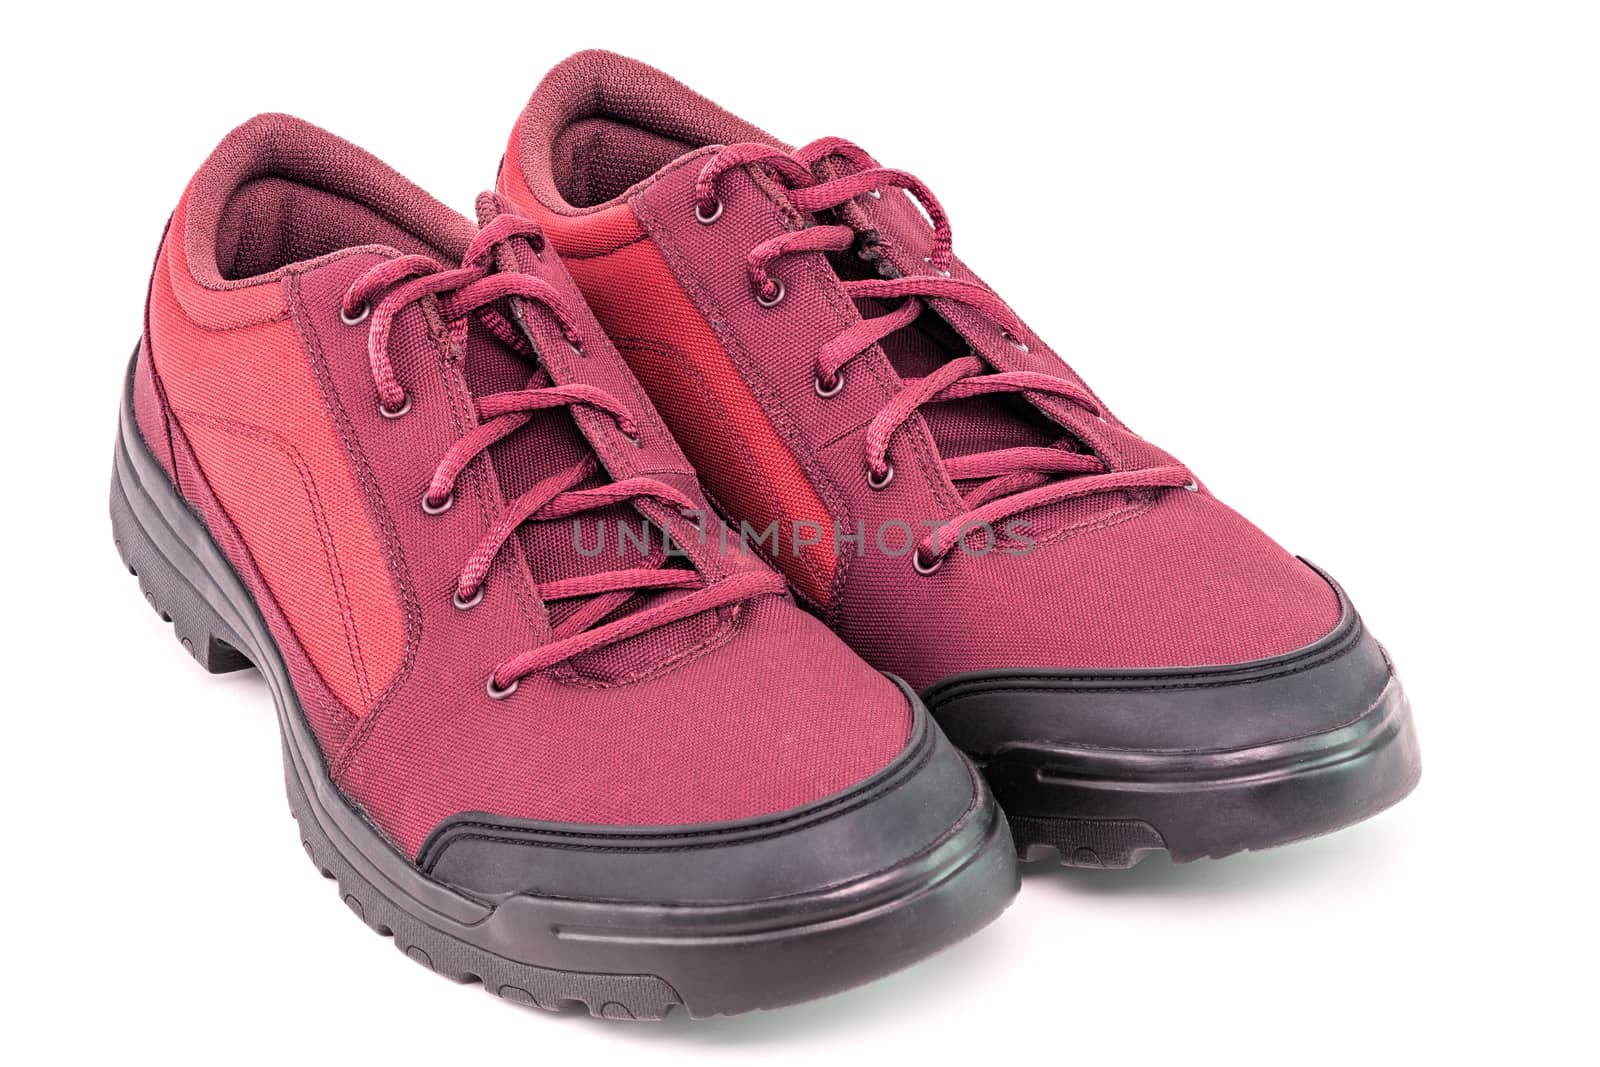 a pair of simple cheap red hiking shoes isolated on white background - perspective close-up view by z1b